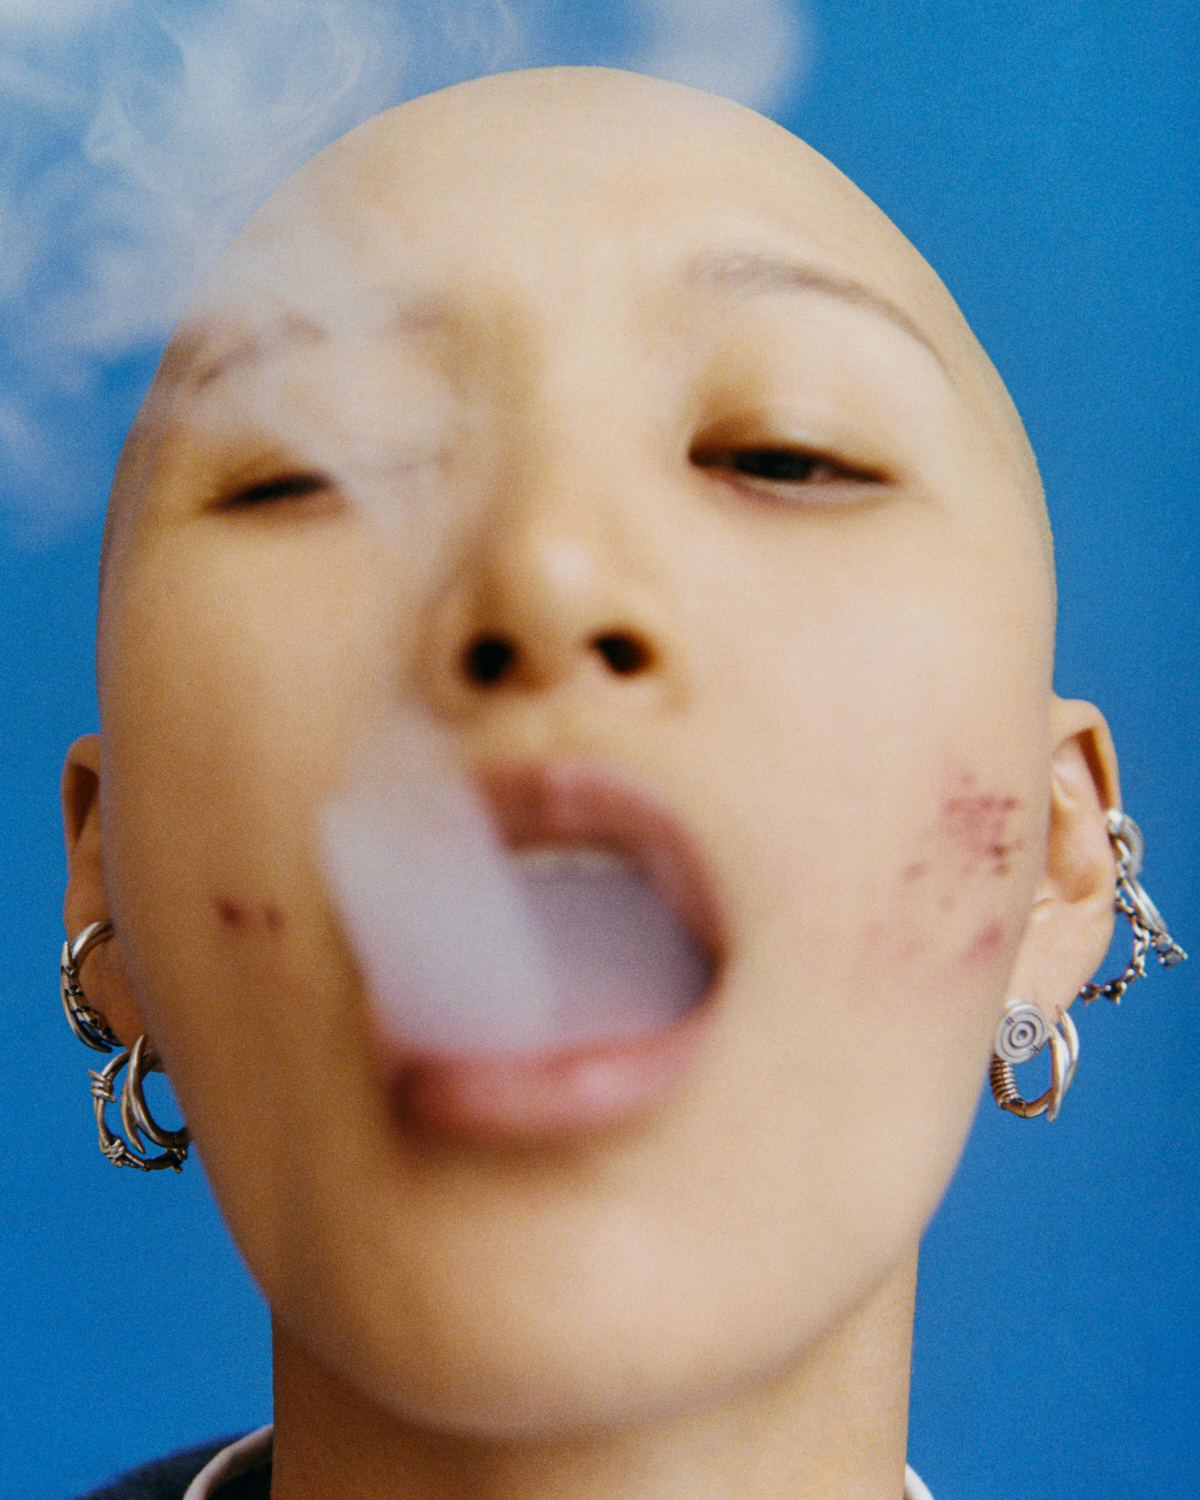 a model with lots of silver hooped earrings and a shaved head blows smoke from their mouth, obscuring part of their face 